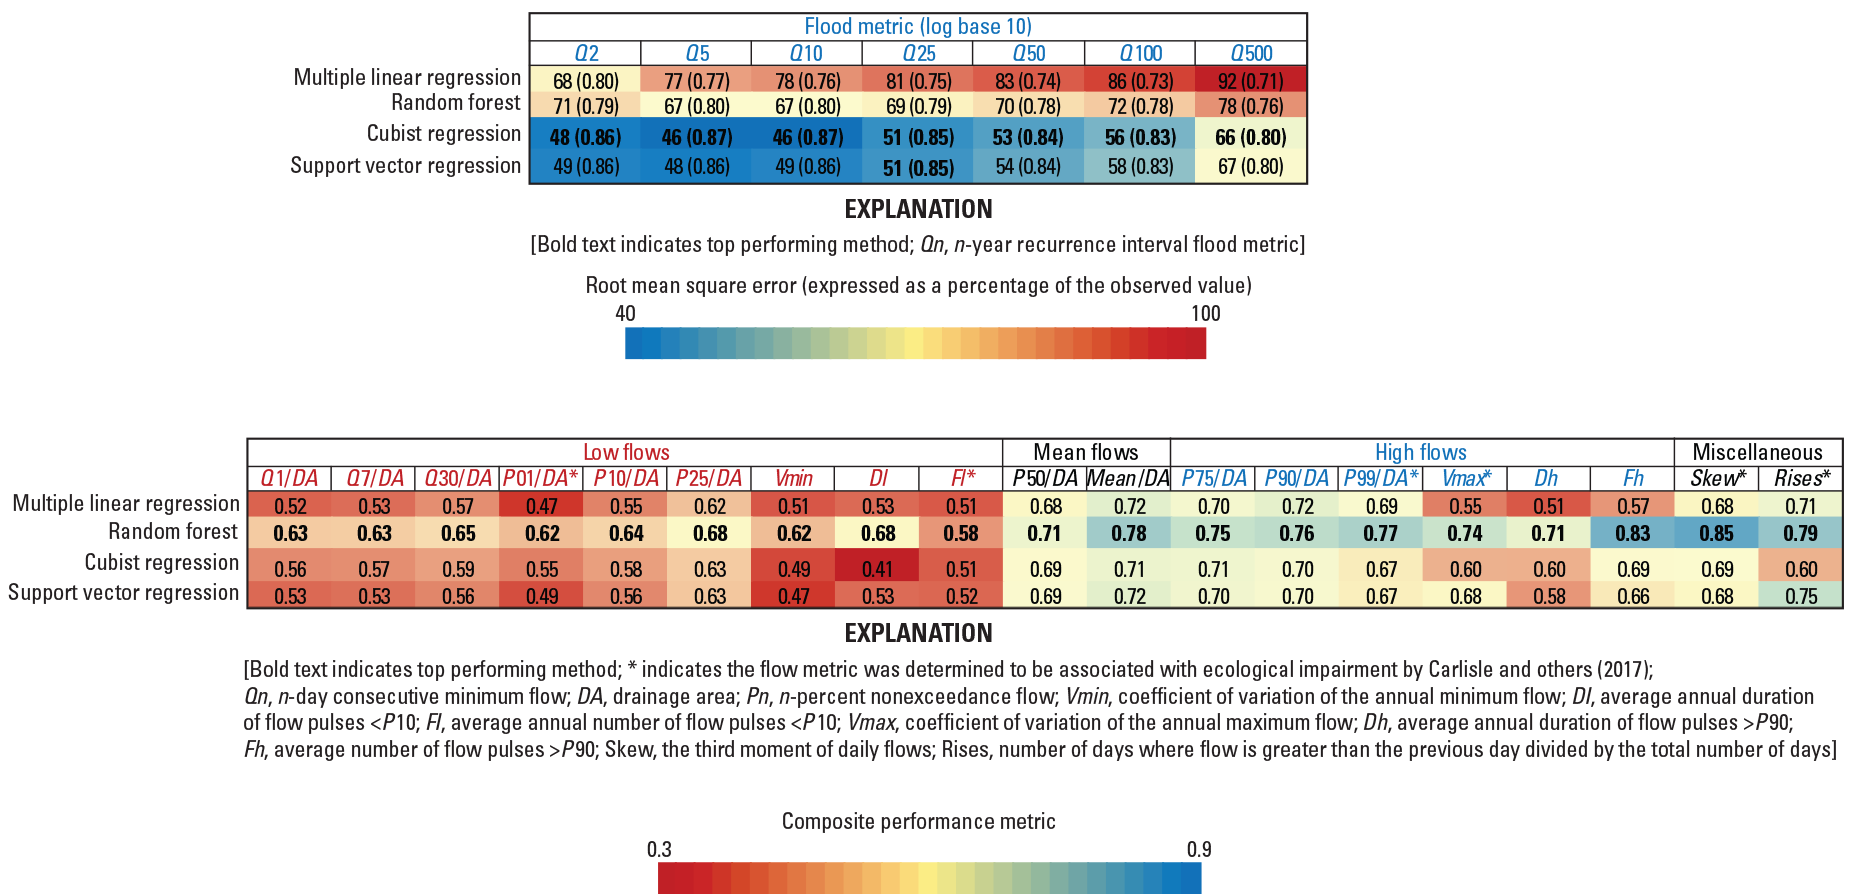 Two tables using colors to show the composite performance metric values.